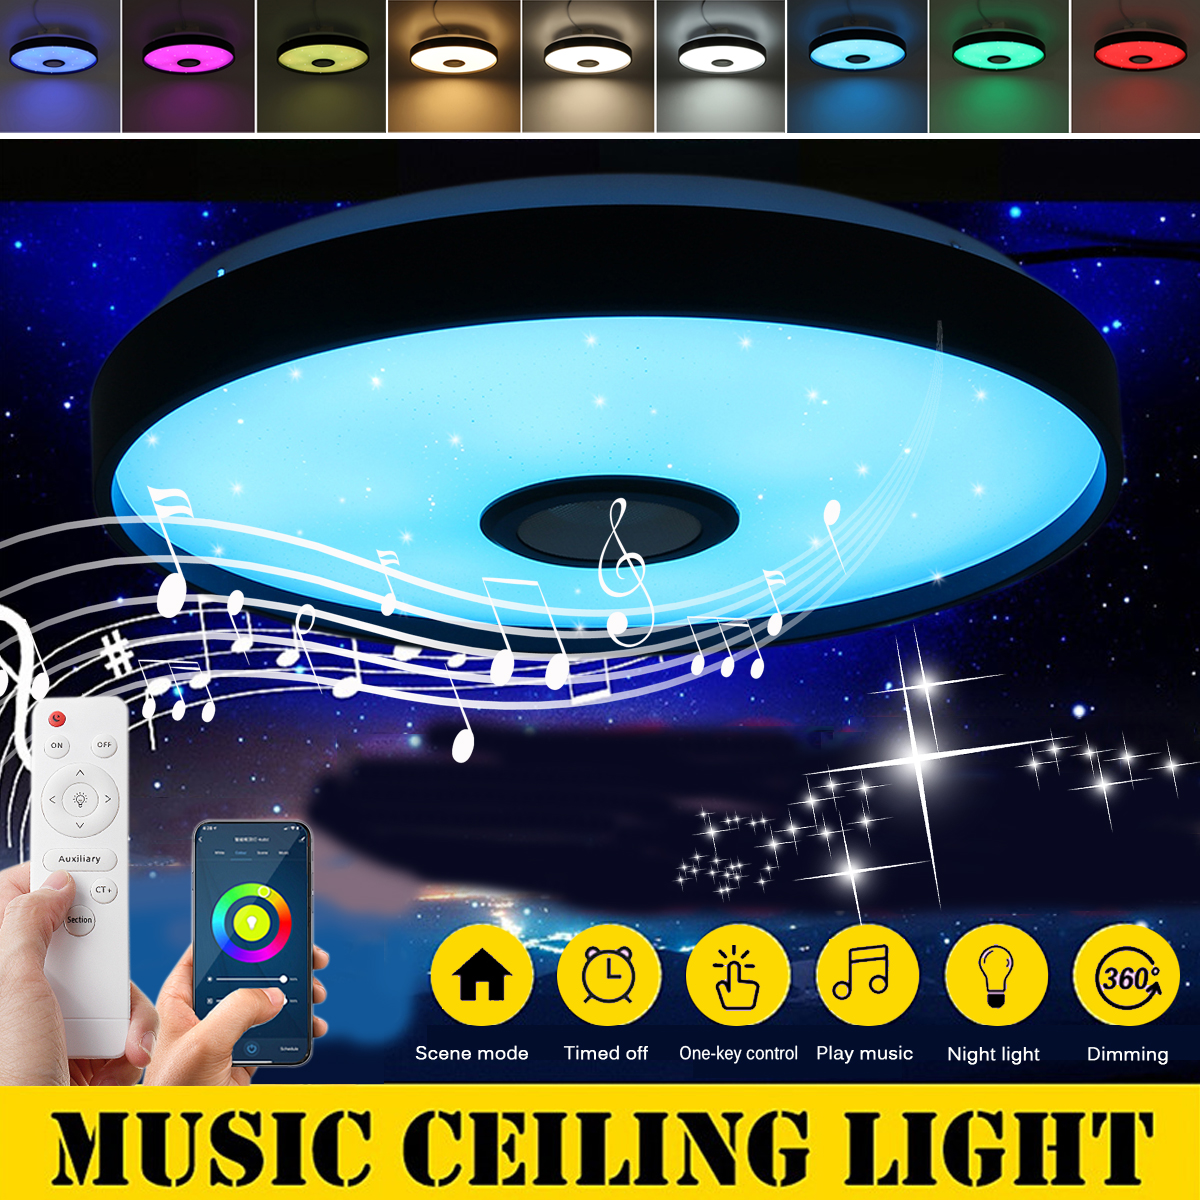 Dimmable-36W-RGB-LED-Ceiling-Light-Lamp-bluetooth-WIFI-Alexa--Google-Home--Remote-1758787-1